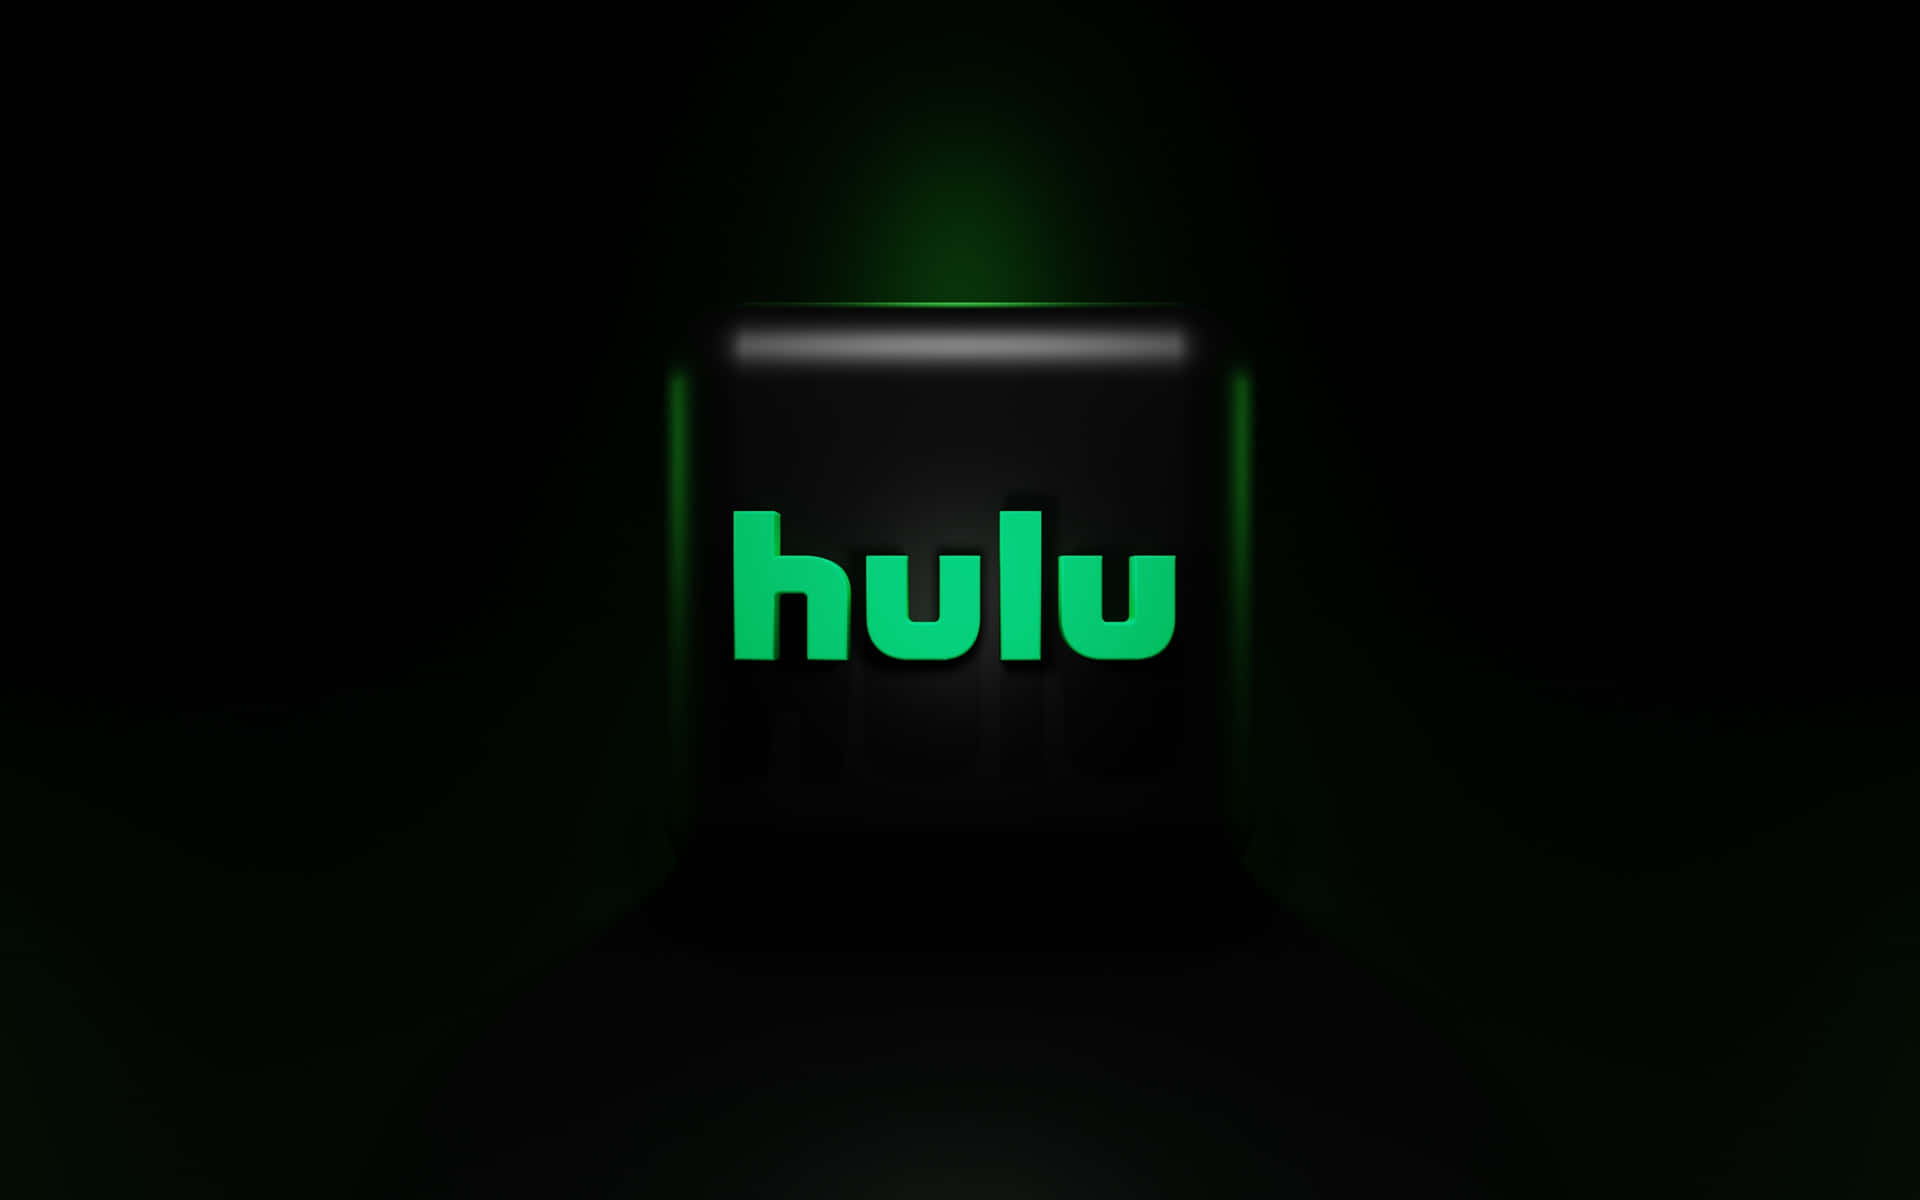 "Stream and enjoy the best of TV on Hulu"